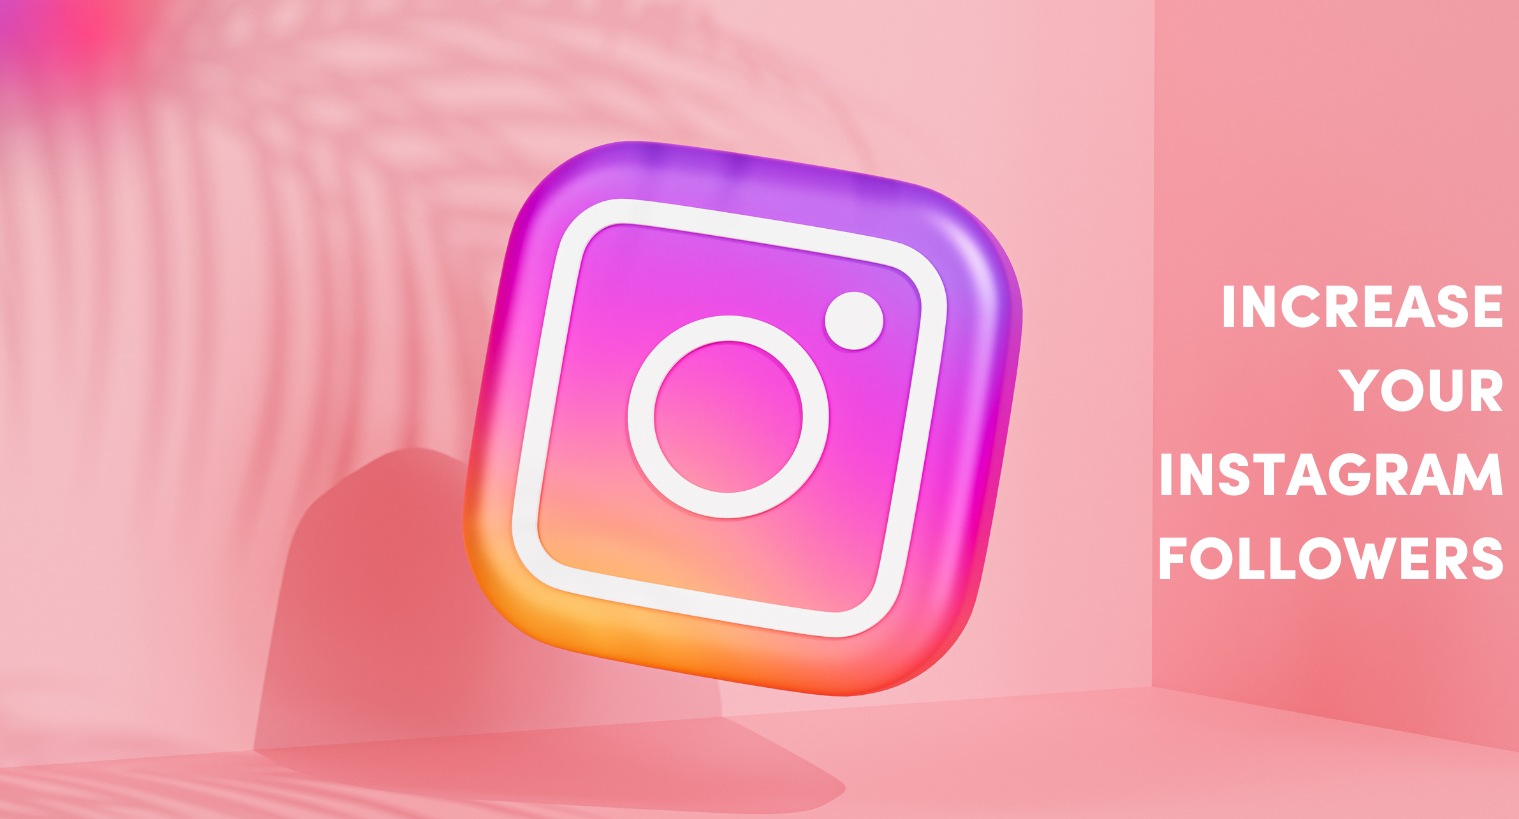 20+ Tips to Increase Followers on Instagram, Get More and Real Followers in Few Steps